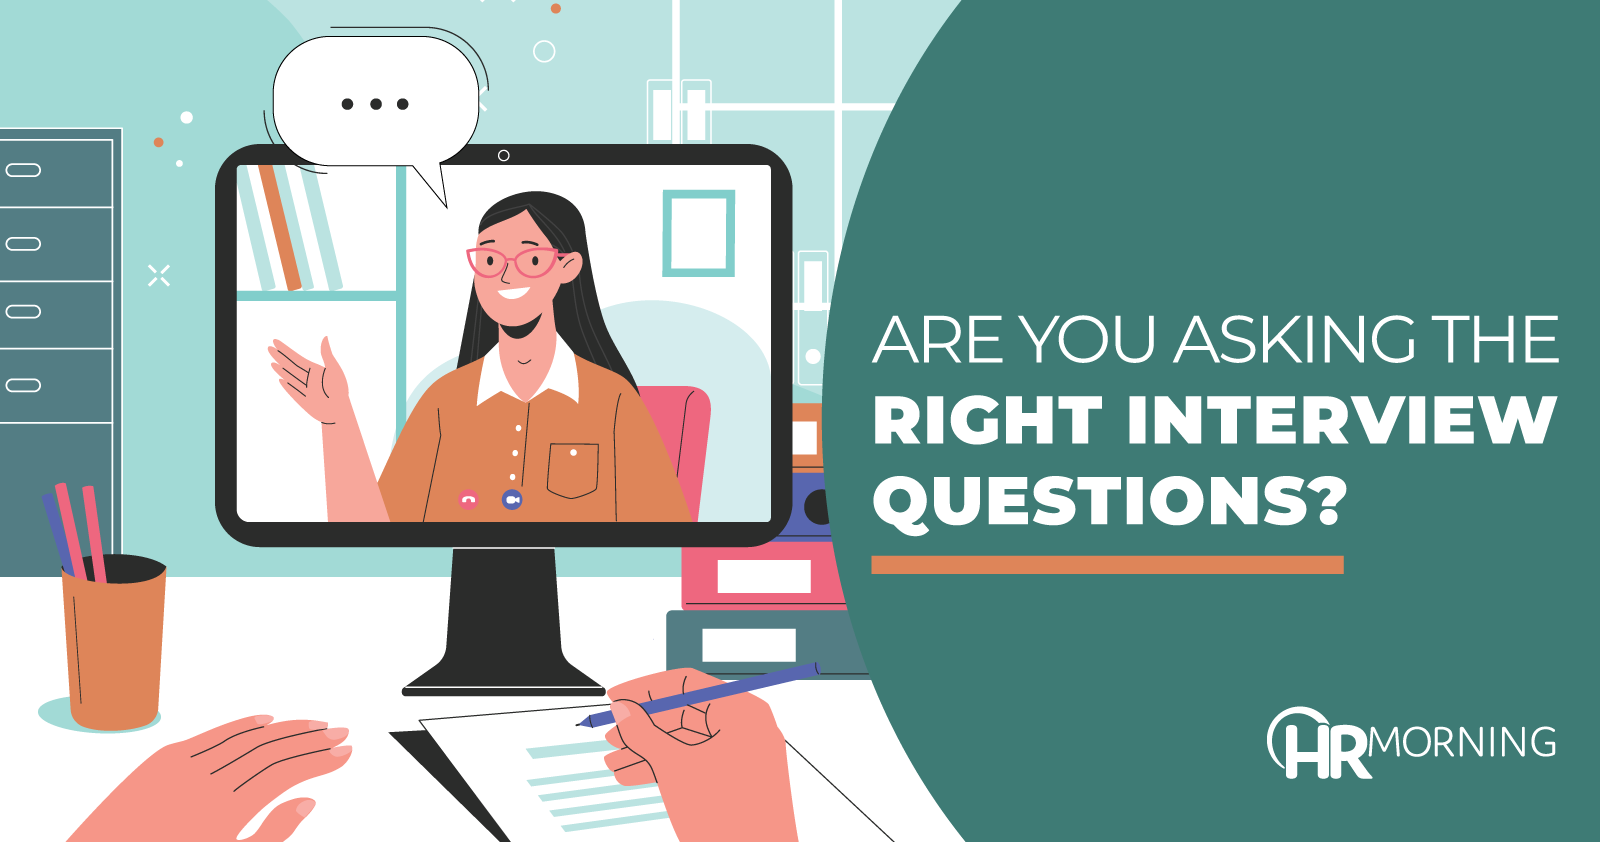 the right interview questions?